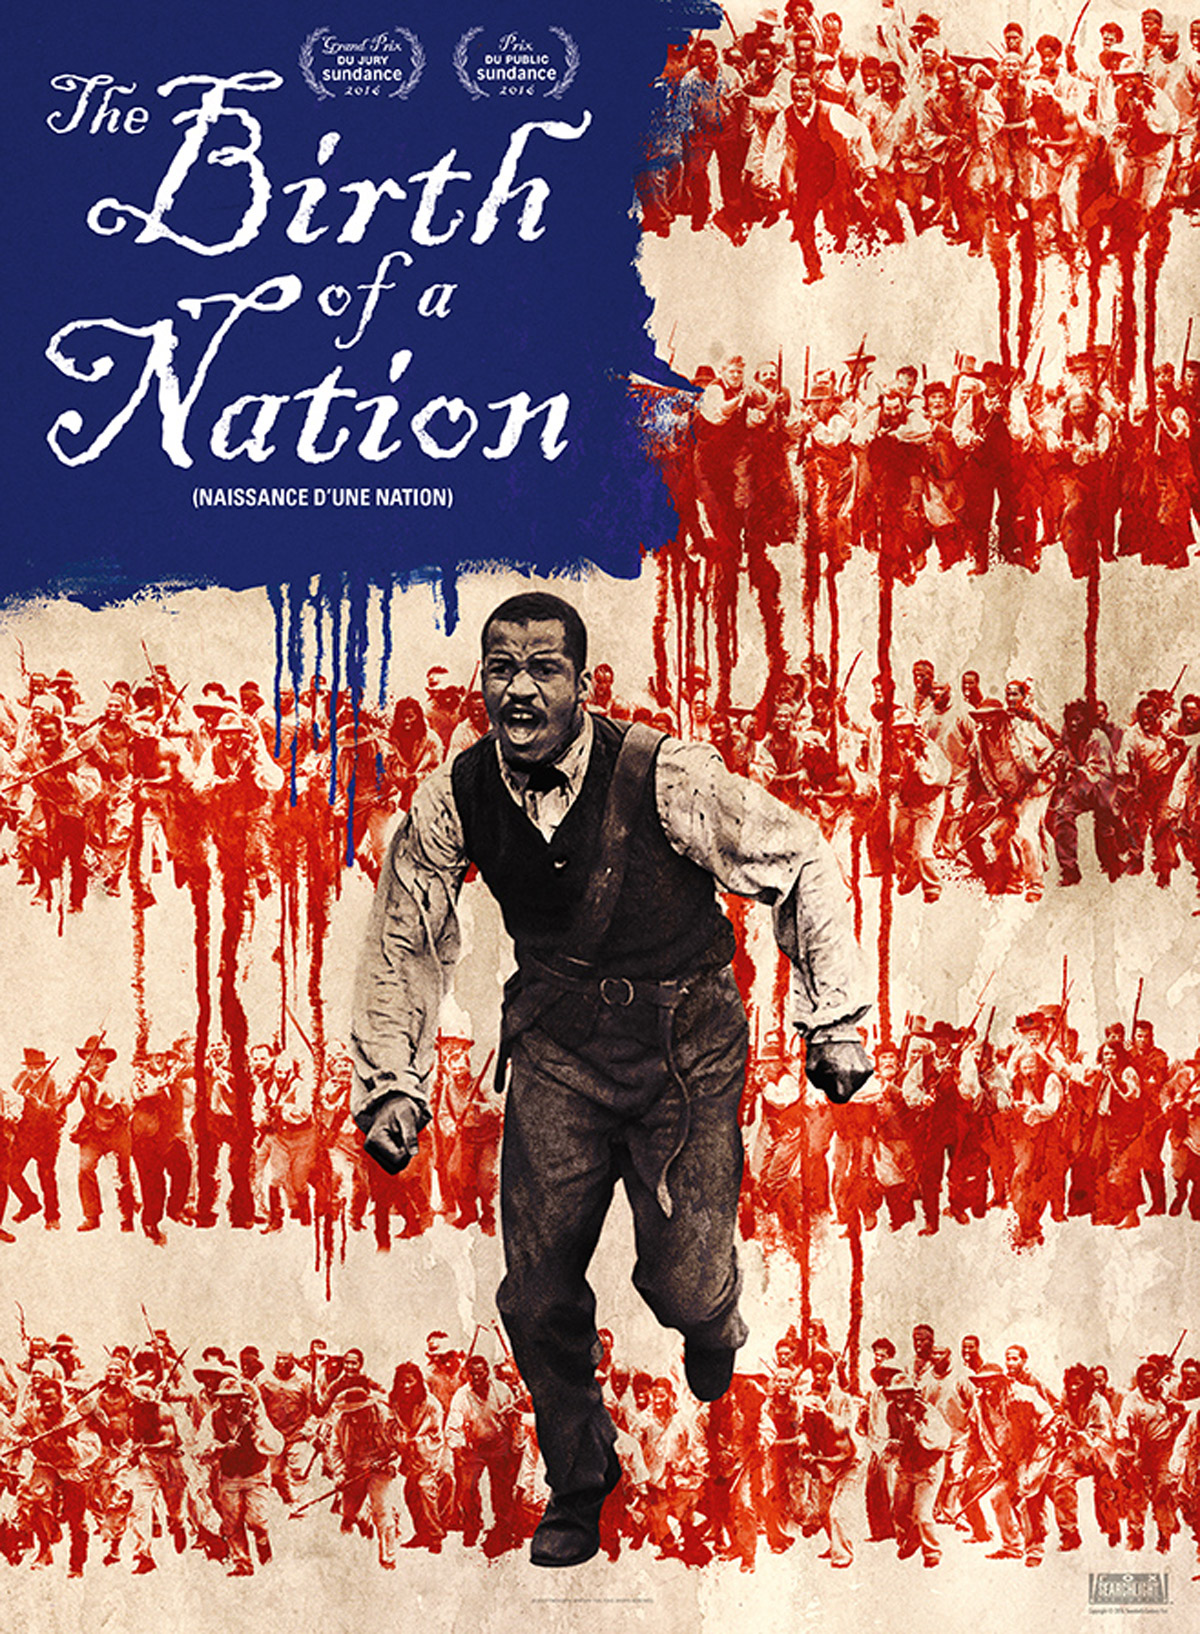 List of films and documentaries-enThe Birth of a Nation Atlantic slave trade